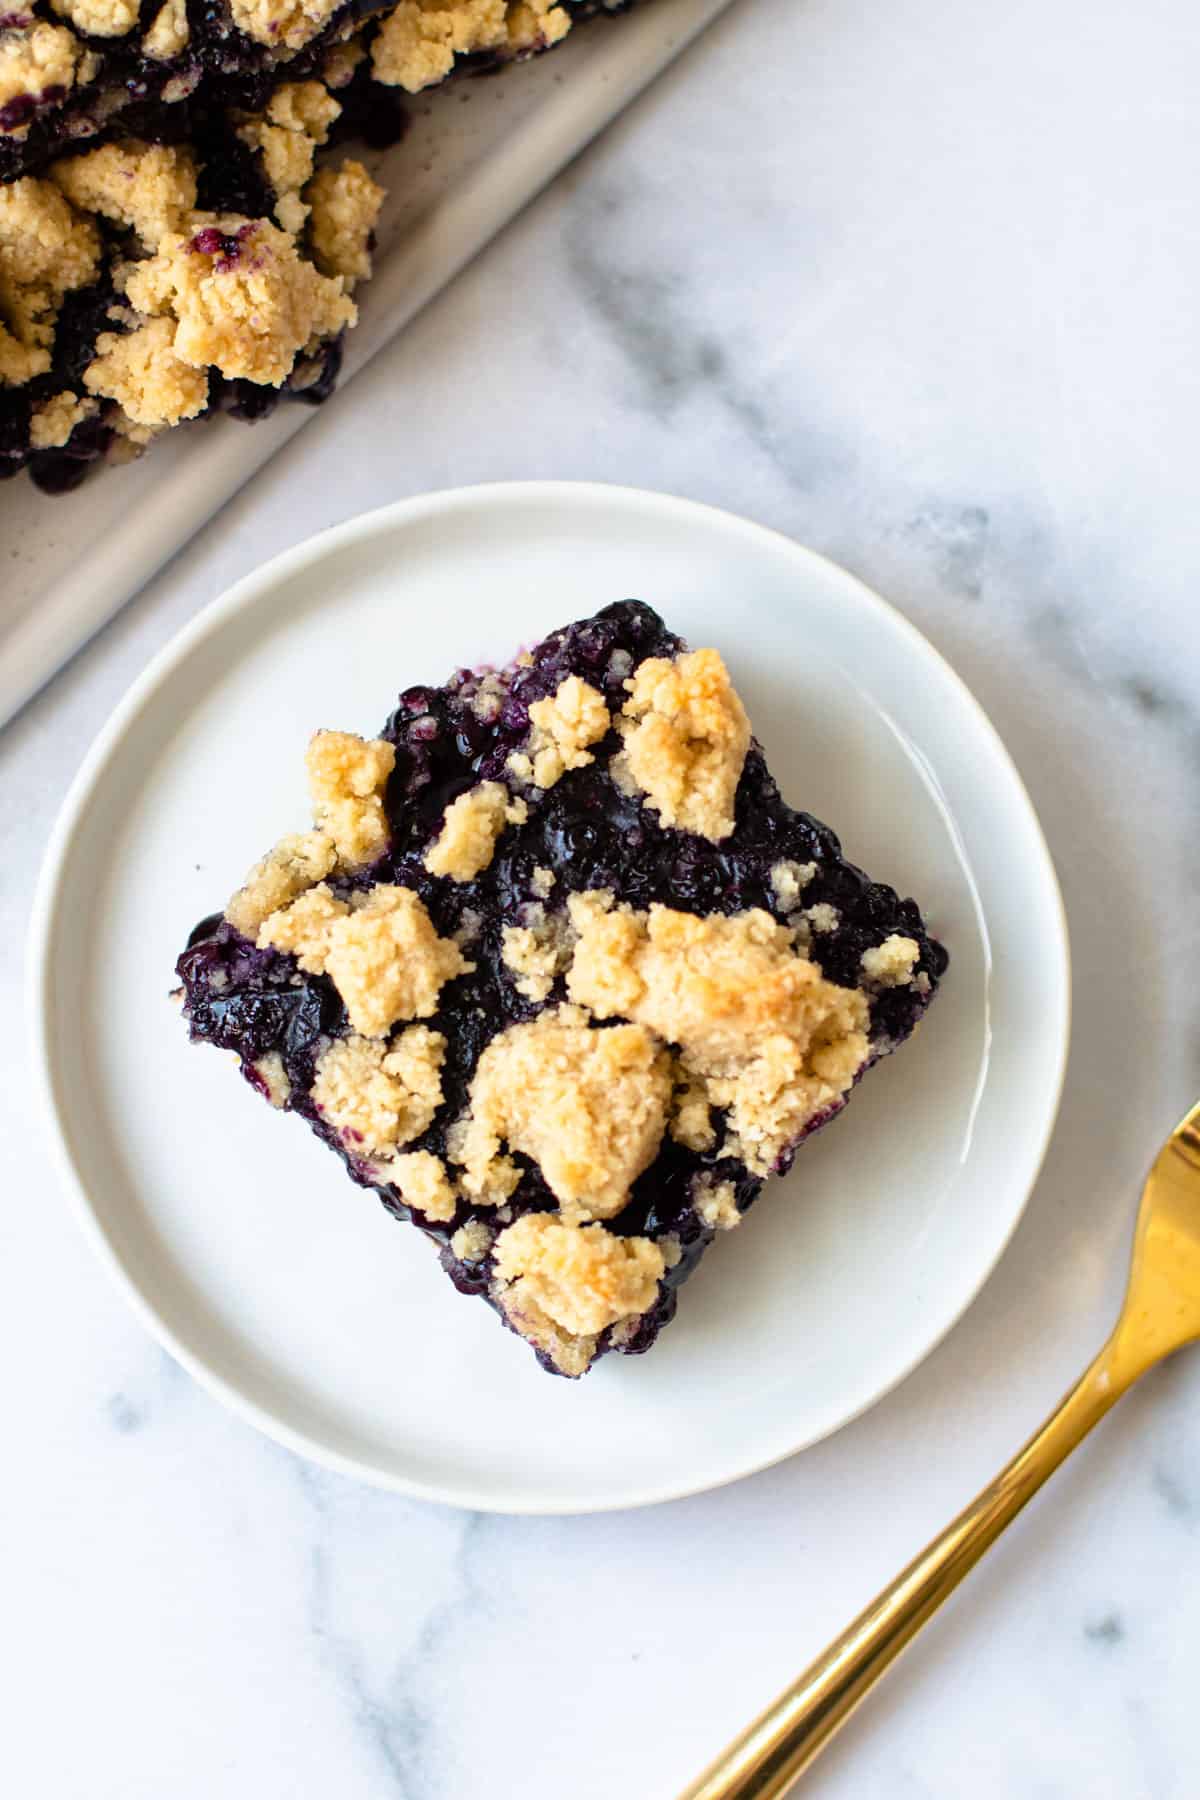 A healthy blueberry bar slice on a plate.